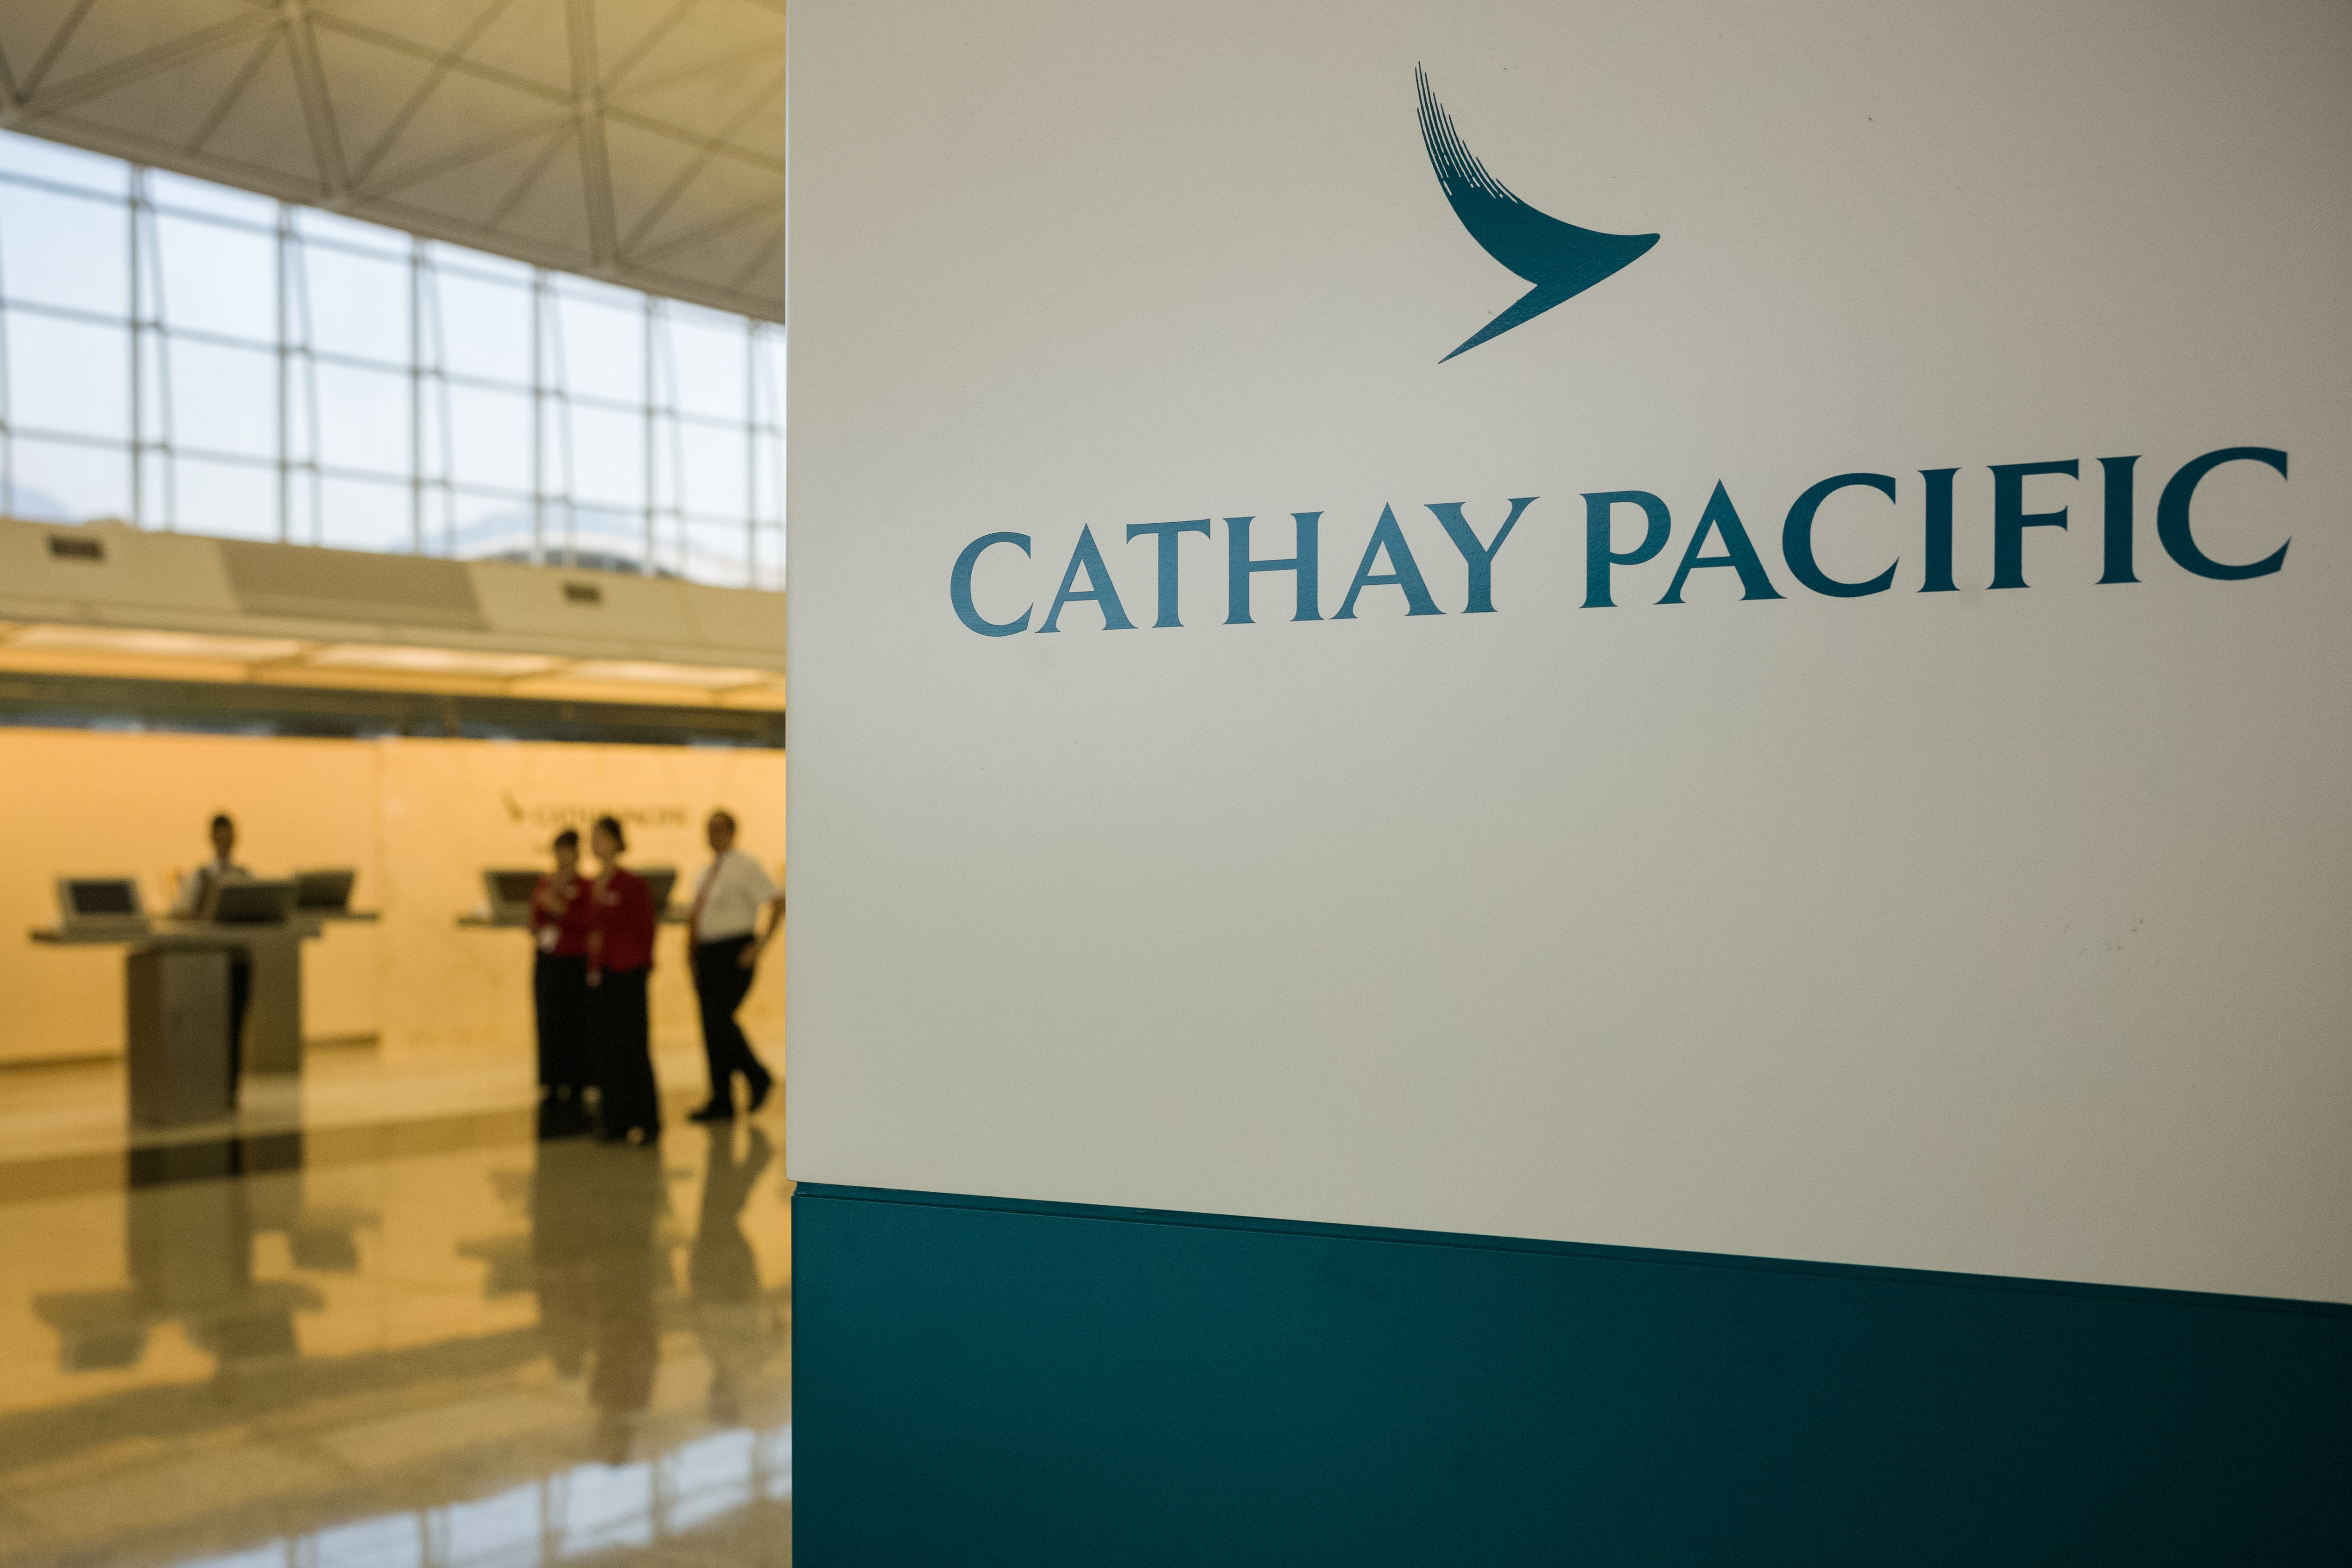 Cathay Pacific makes second first class blunder in two weeks